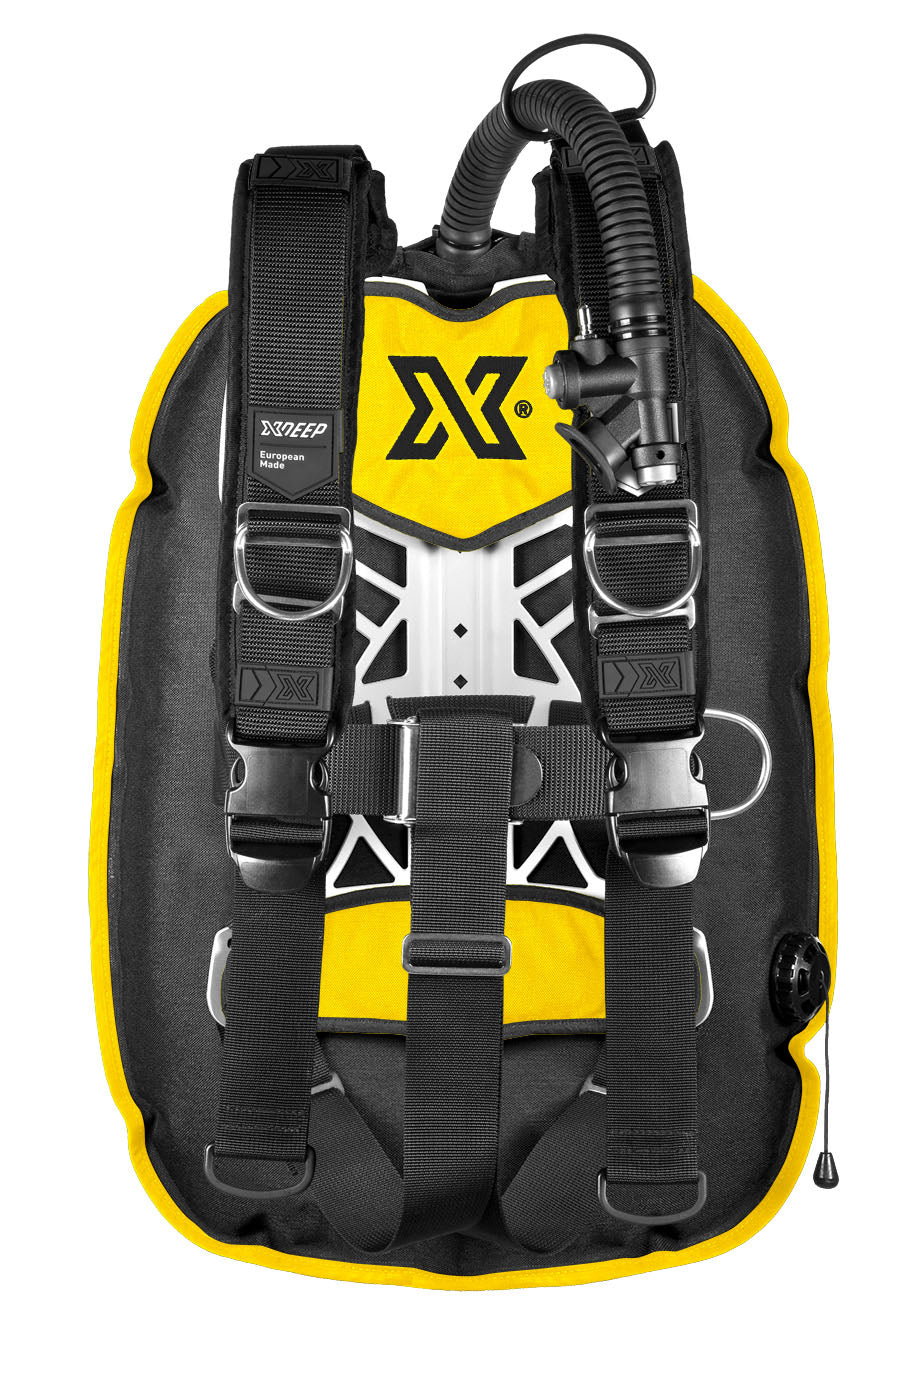 XDEEP XDEEP Ghost Wing System by Oyster Diving Shop